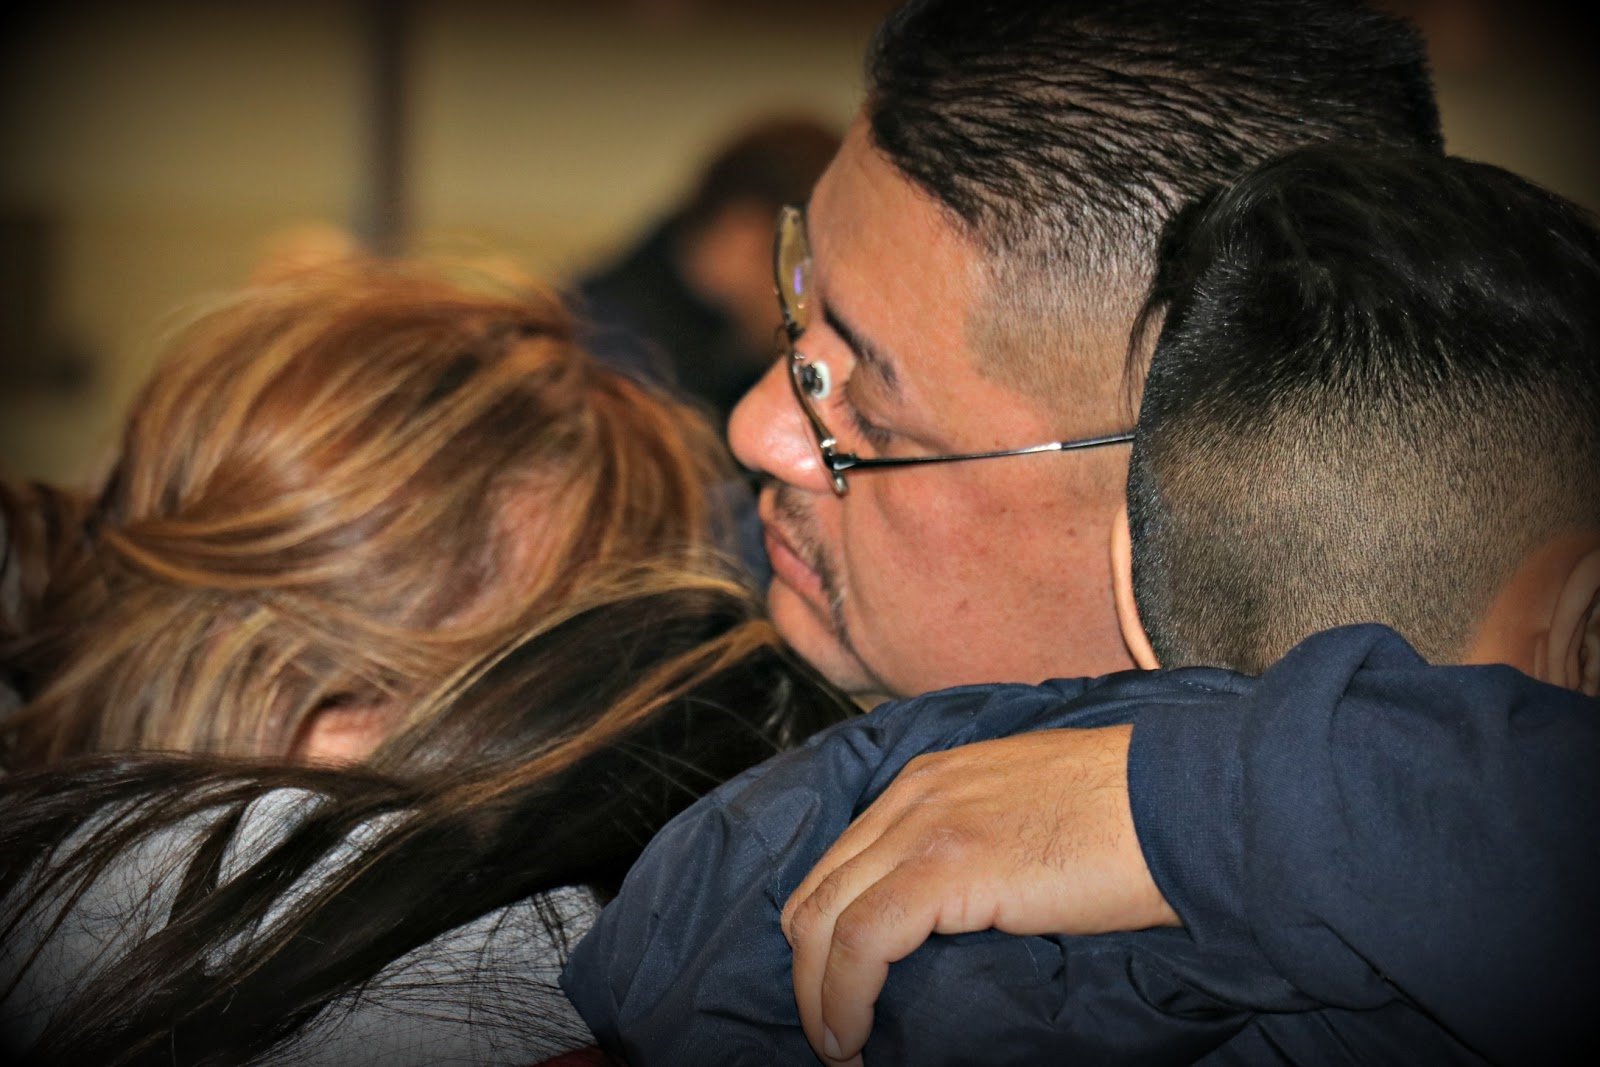 PHOTO: Jorge Garcia says goodbye to his family at Detroit Metropolitan airport before being deported, Jan. 15, 2018.